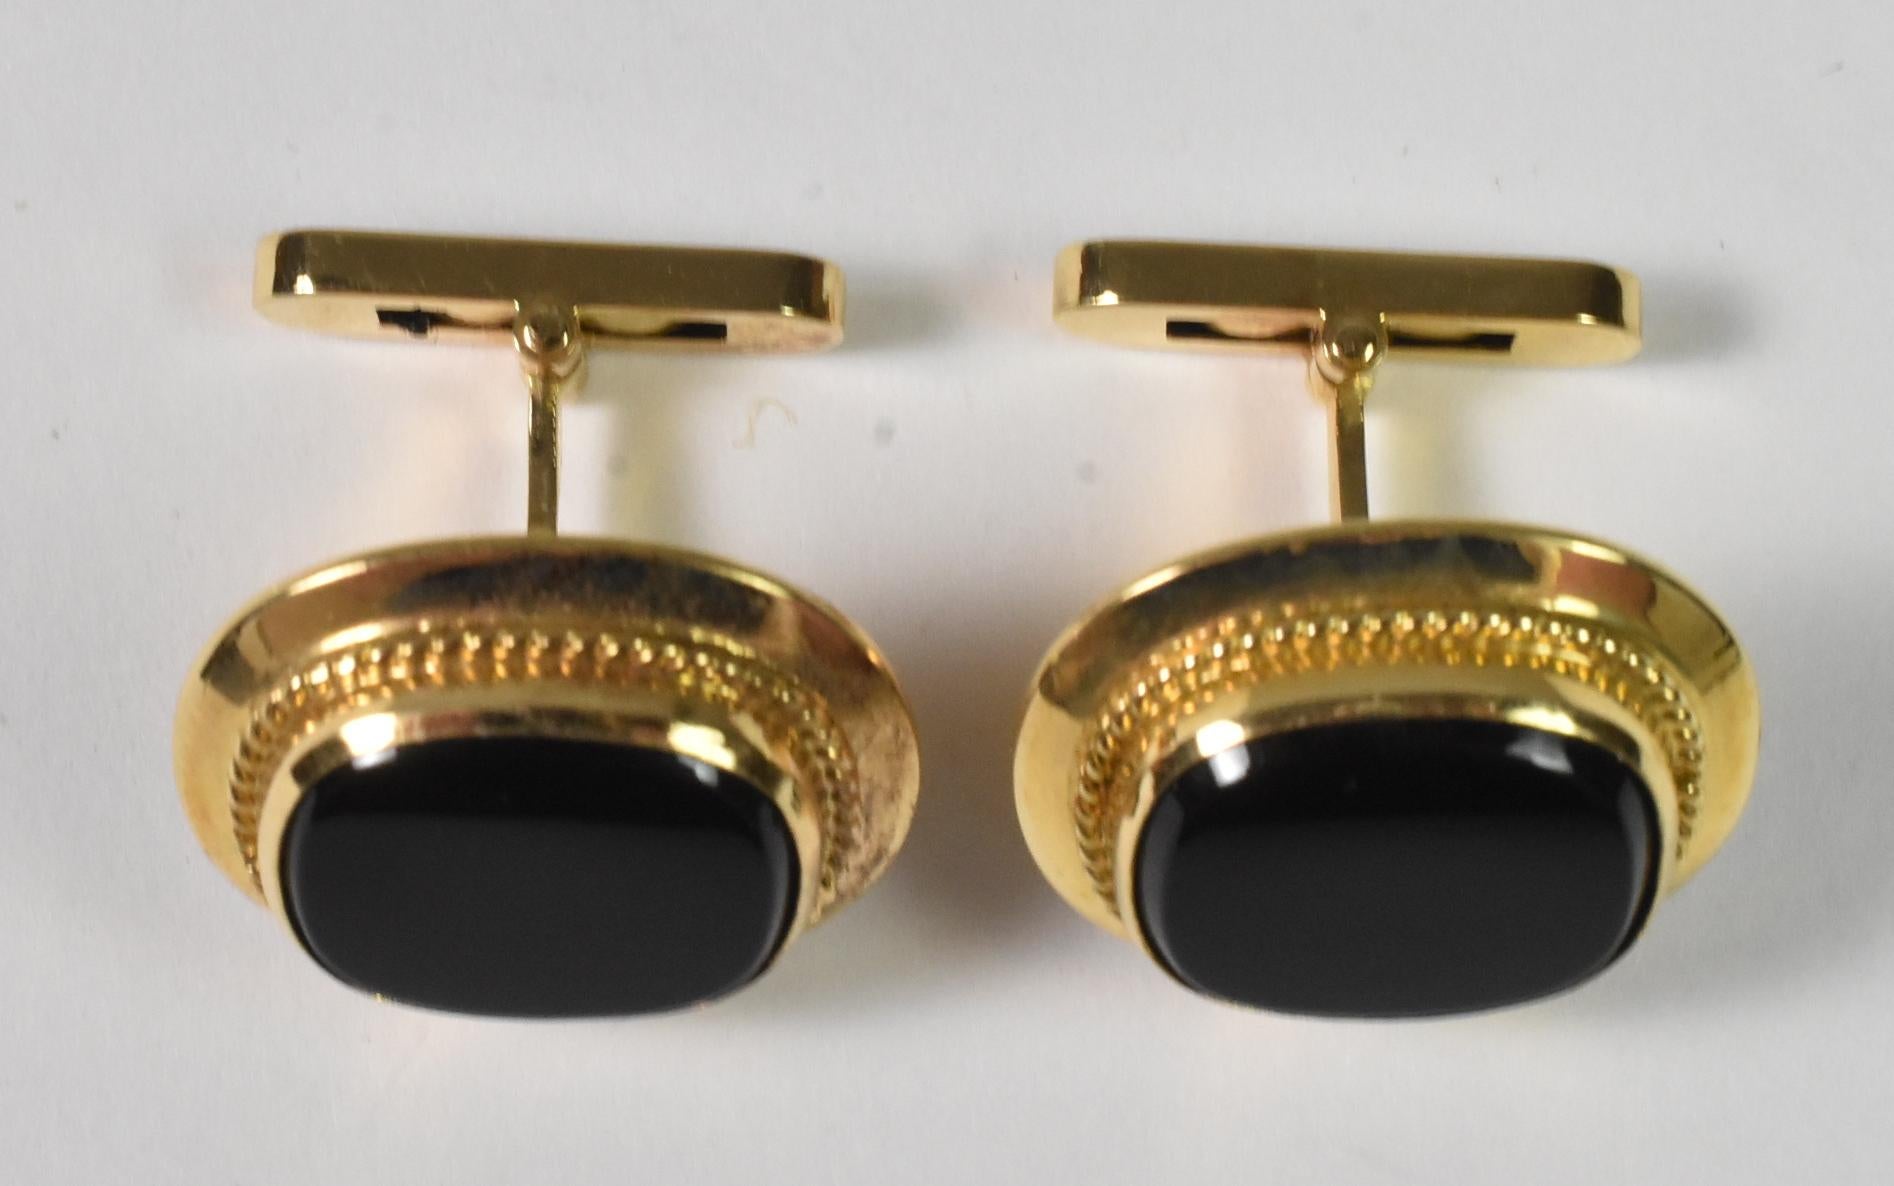 18k yellow gold cufflinks with black onyx center stones. Beautiful form, 18K spring clip high polished onyx. Excellent condition, like new. 13 grams. Onyx stone is 1/2